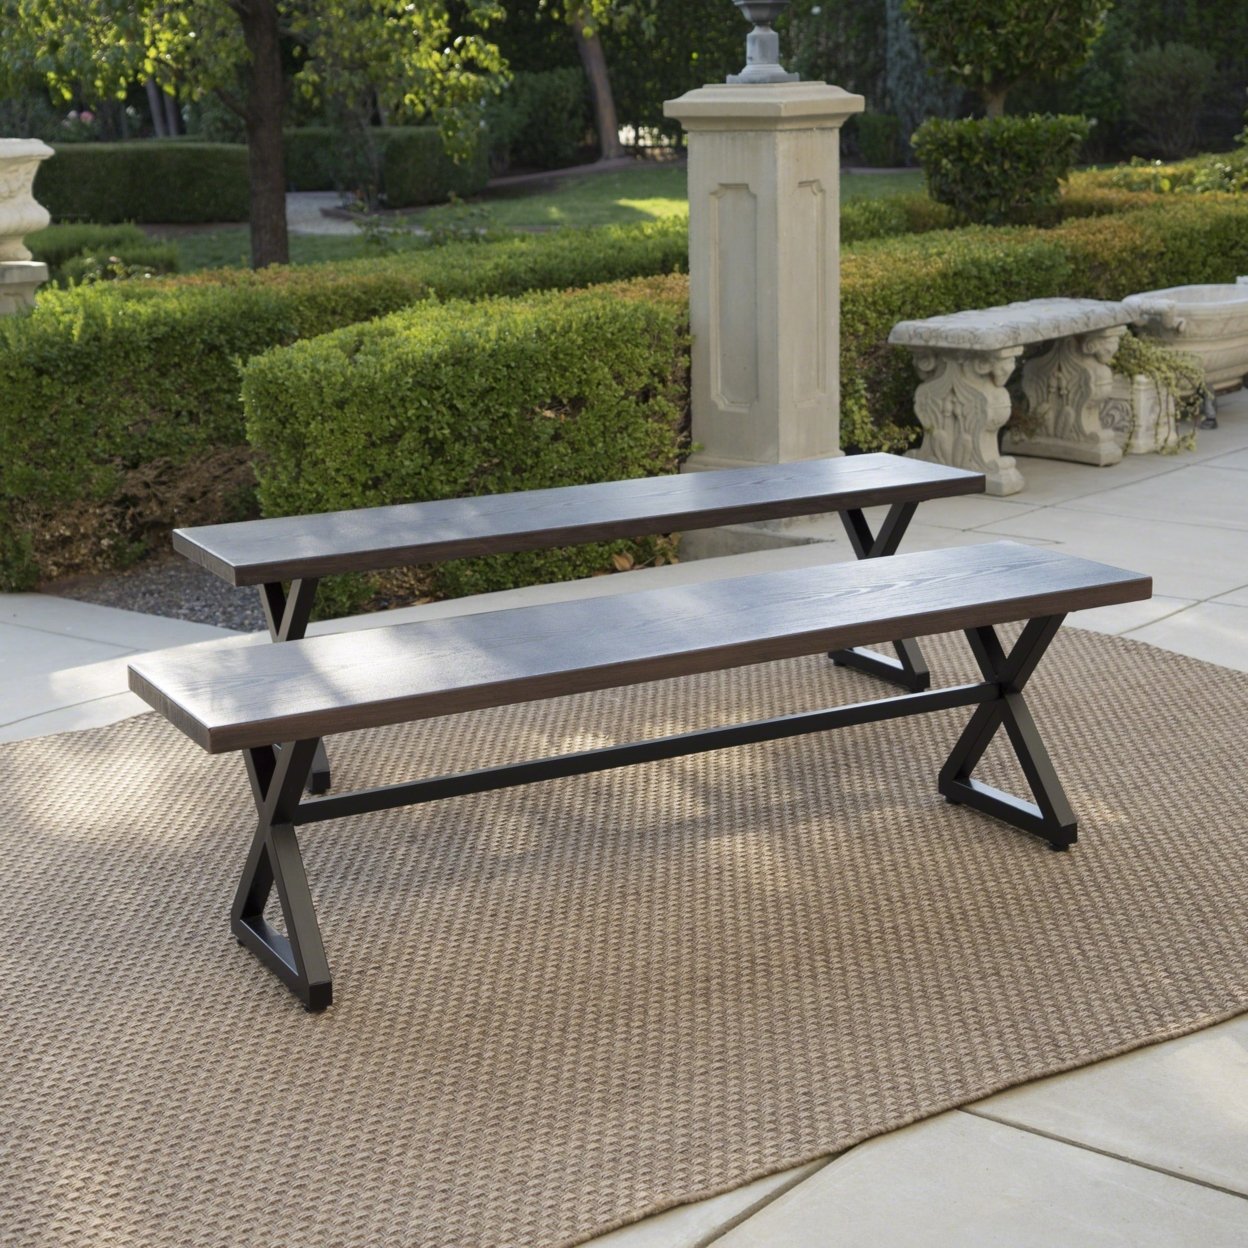 Rosarito Outdoor Aluminum Dining Bench With Black Steel Frame (Set Of 2) - Brown